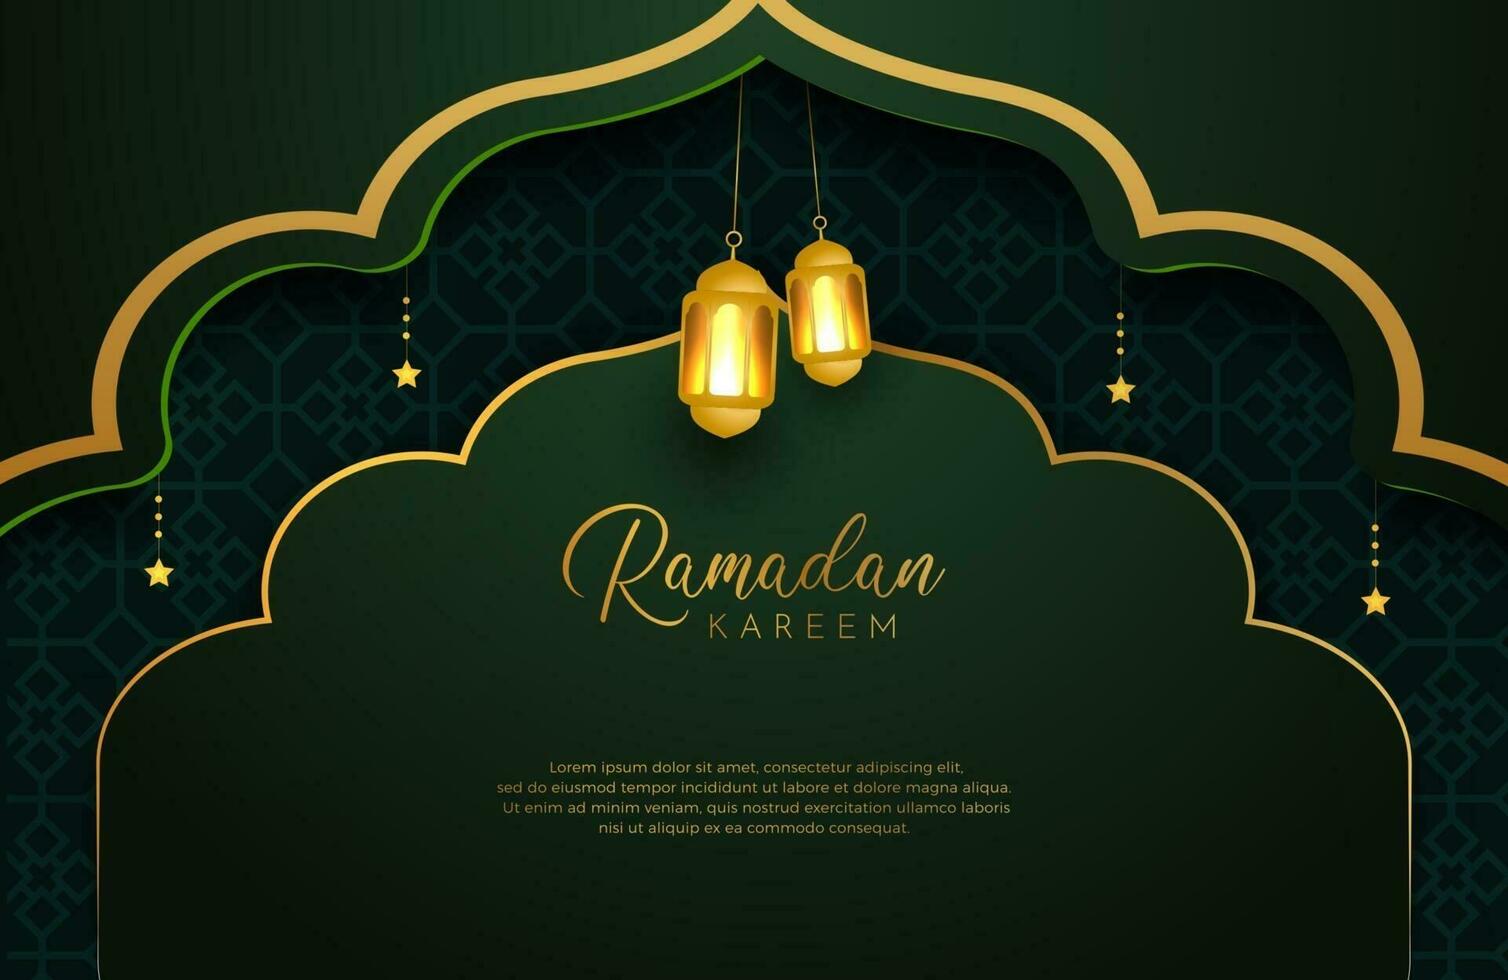 Ramadan Kareem background with gold and green color luxury style Vector illustration for Islamic holy month celebrations decorated with stars and lantern